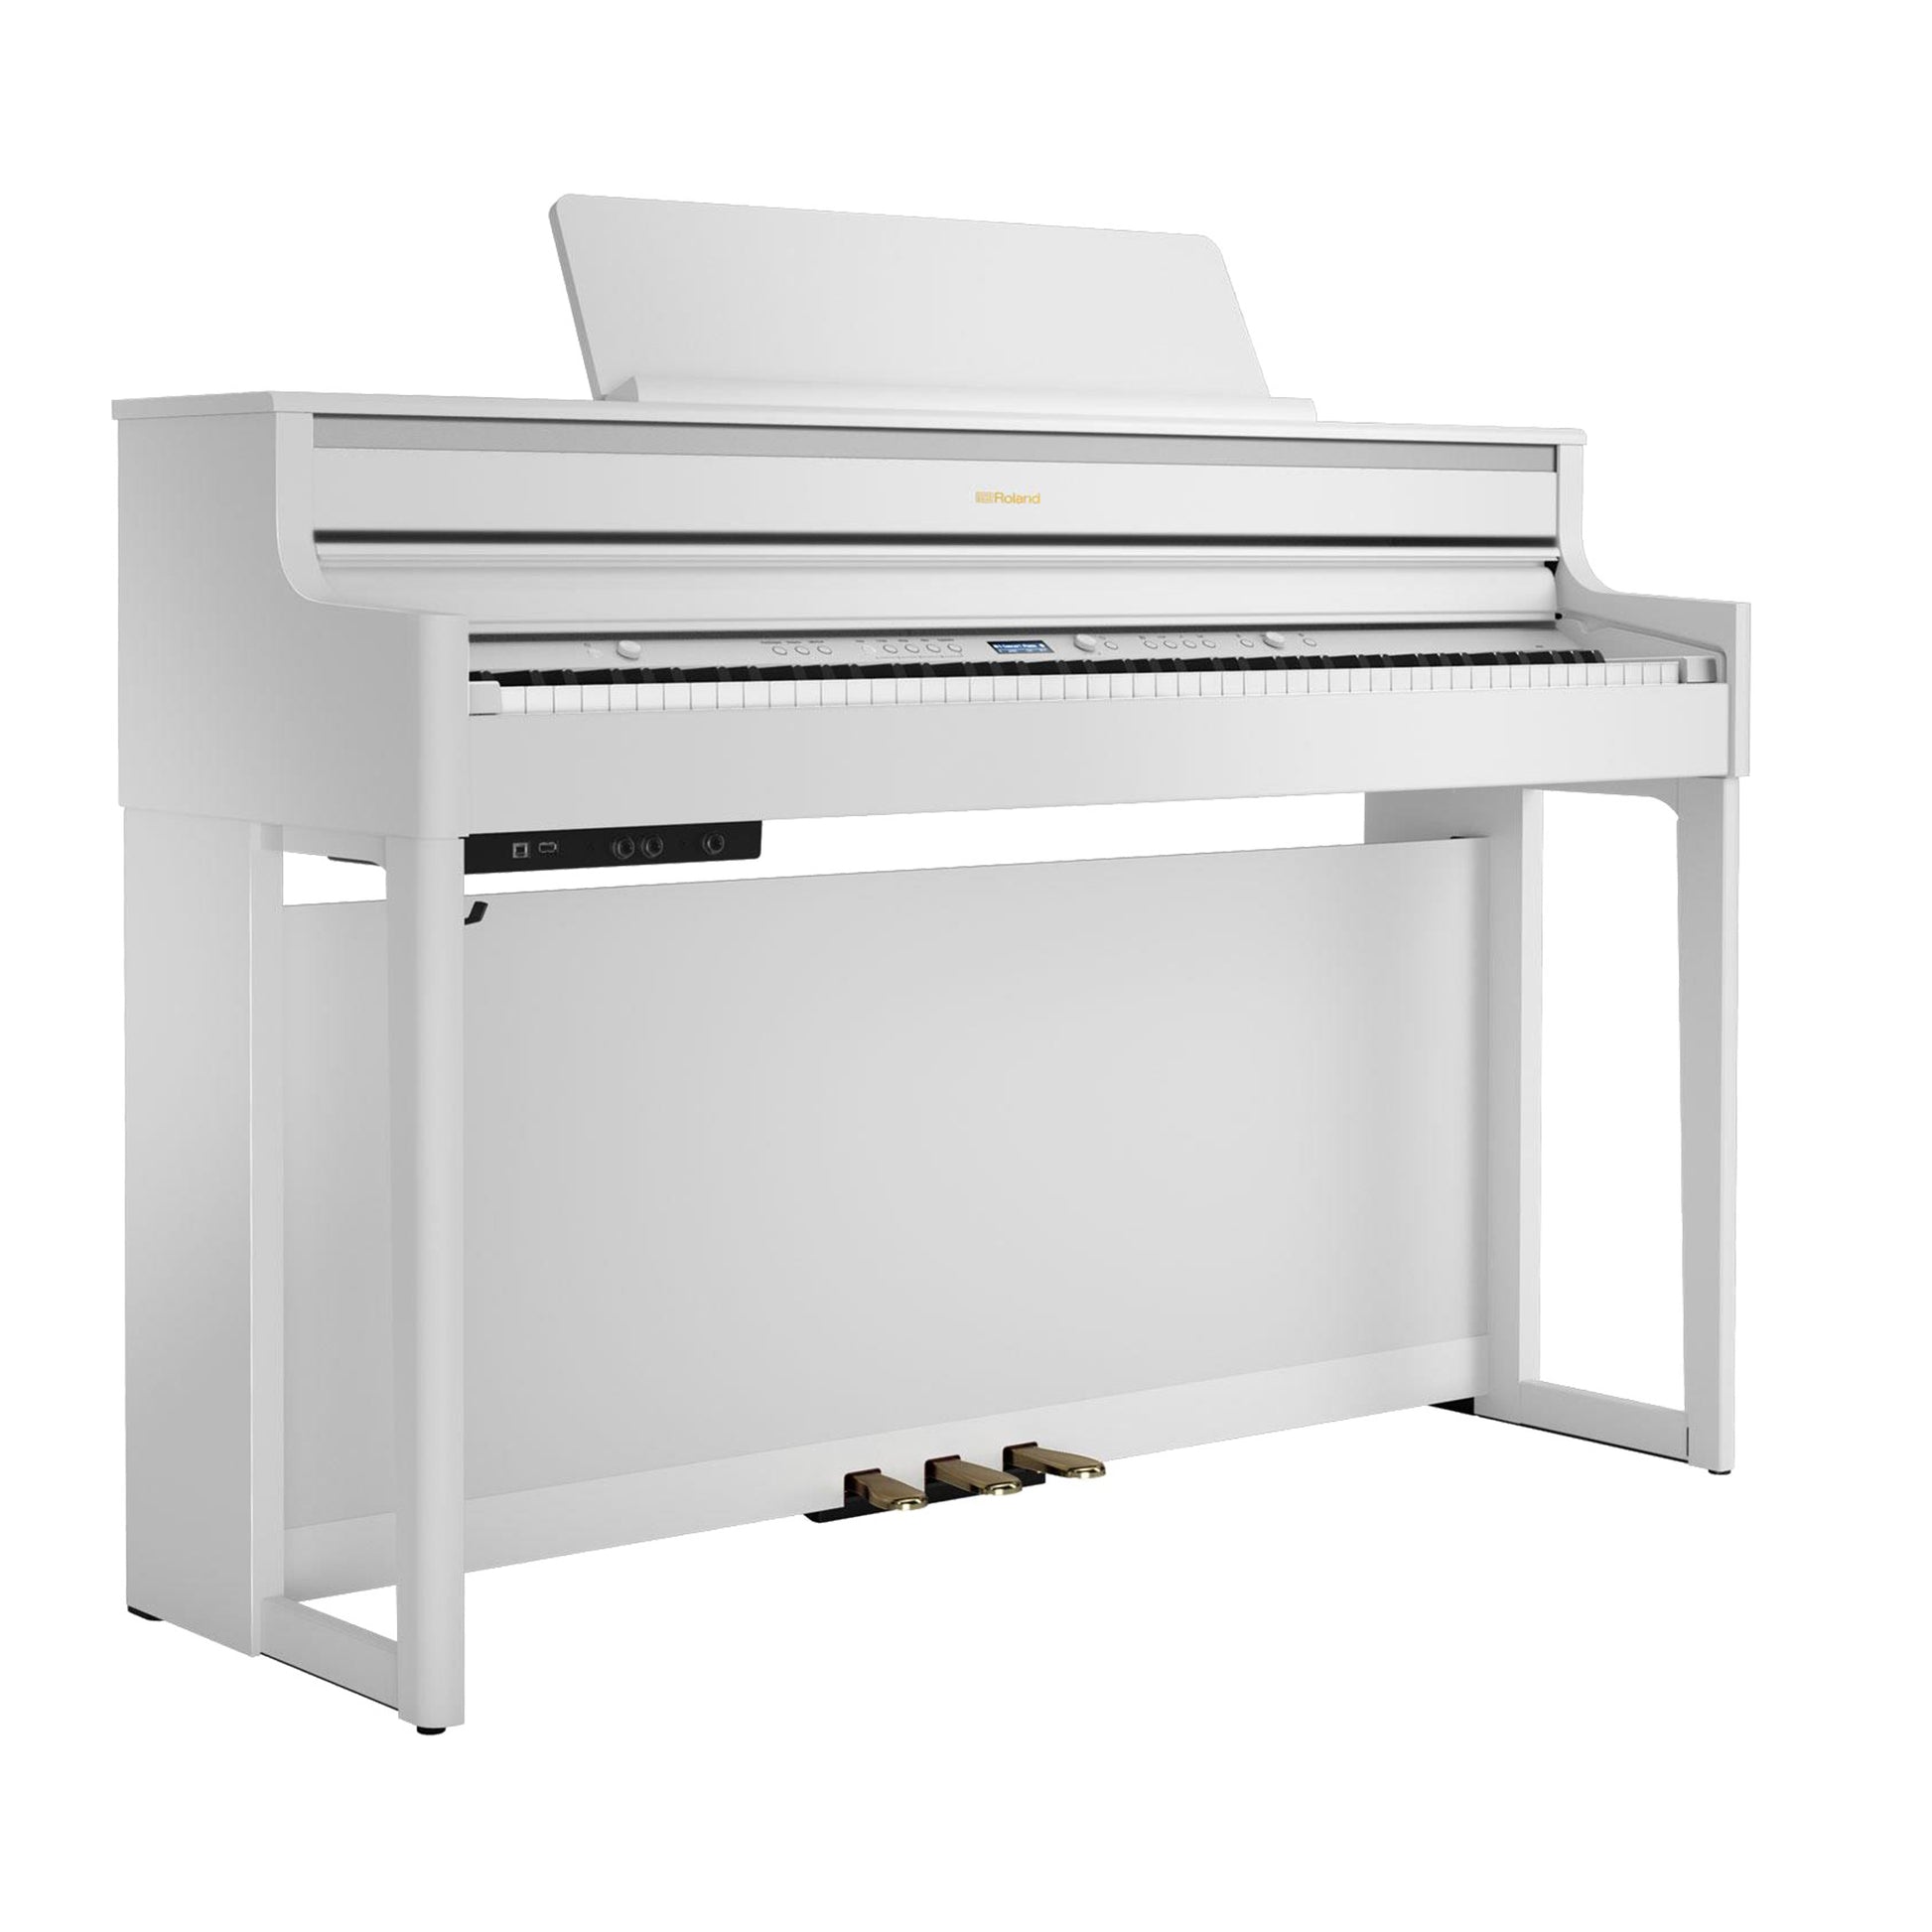 Buy Roland HP704 WH white colour digital piano with 88 keys keyboard from SR Lifestyle Singapore. Check out latest sales, promotions and pricing.